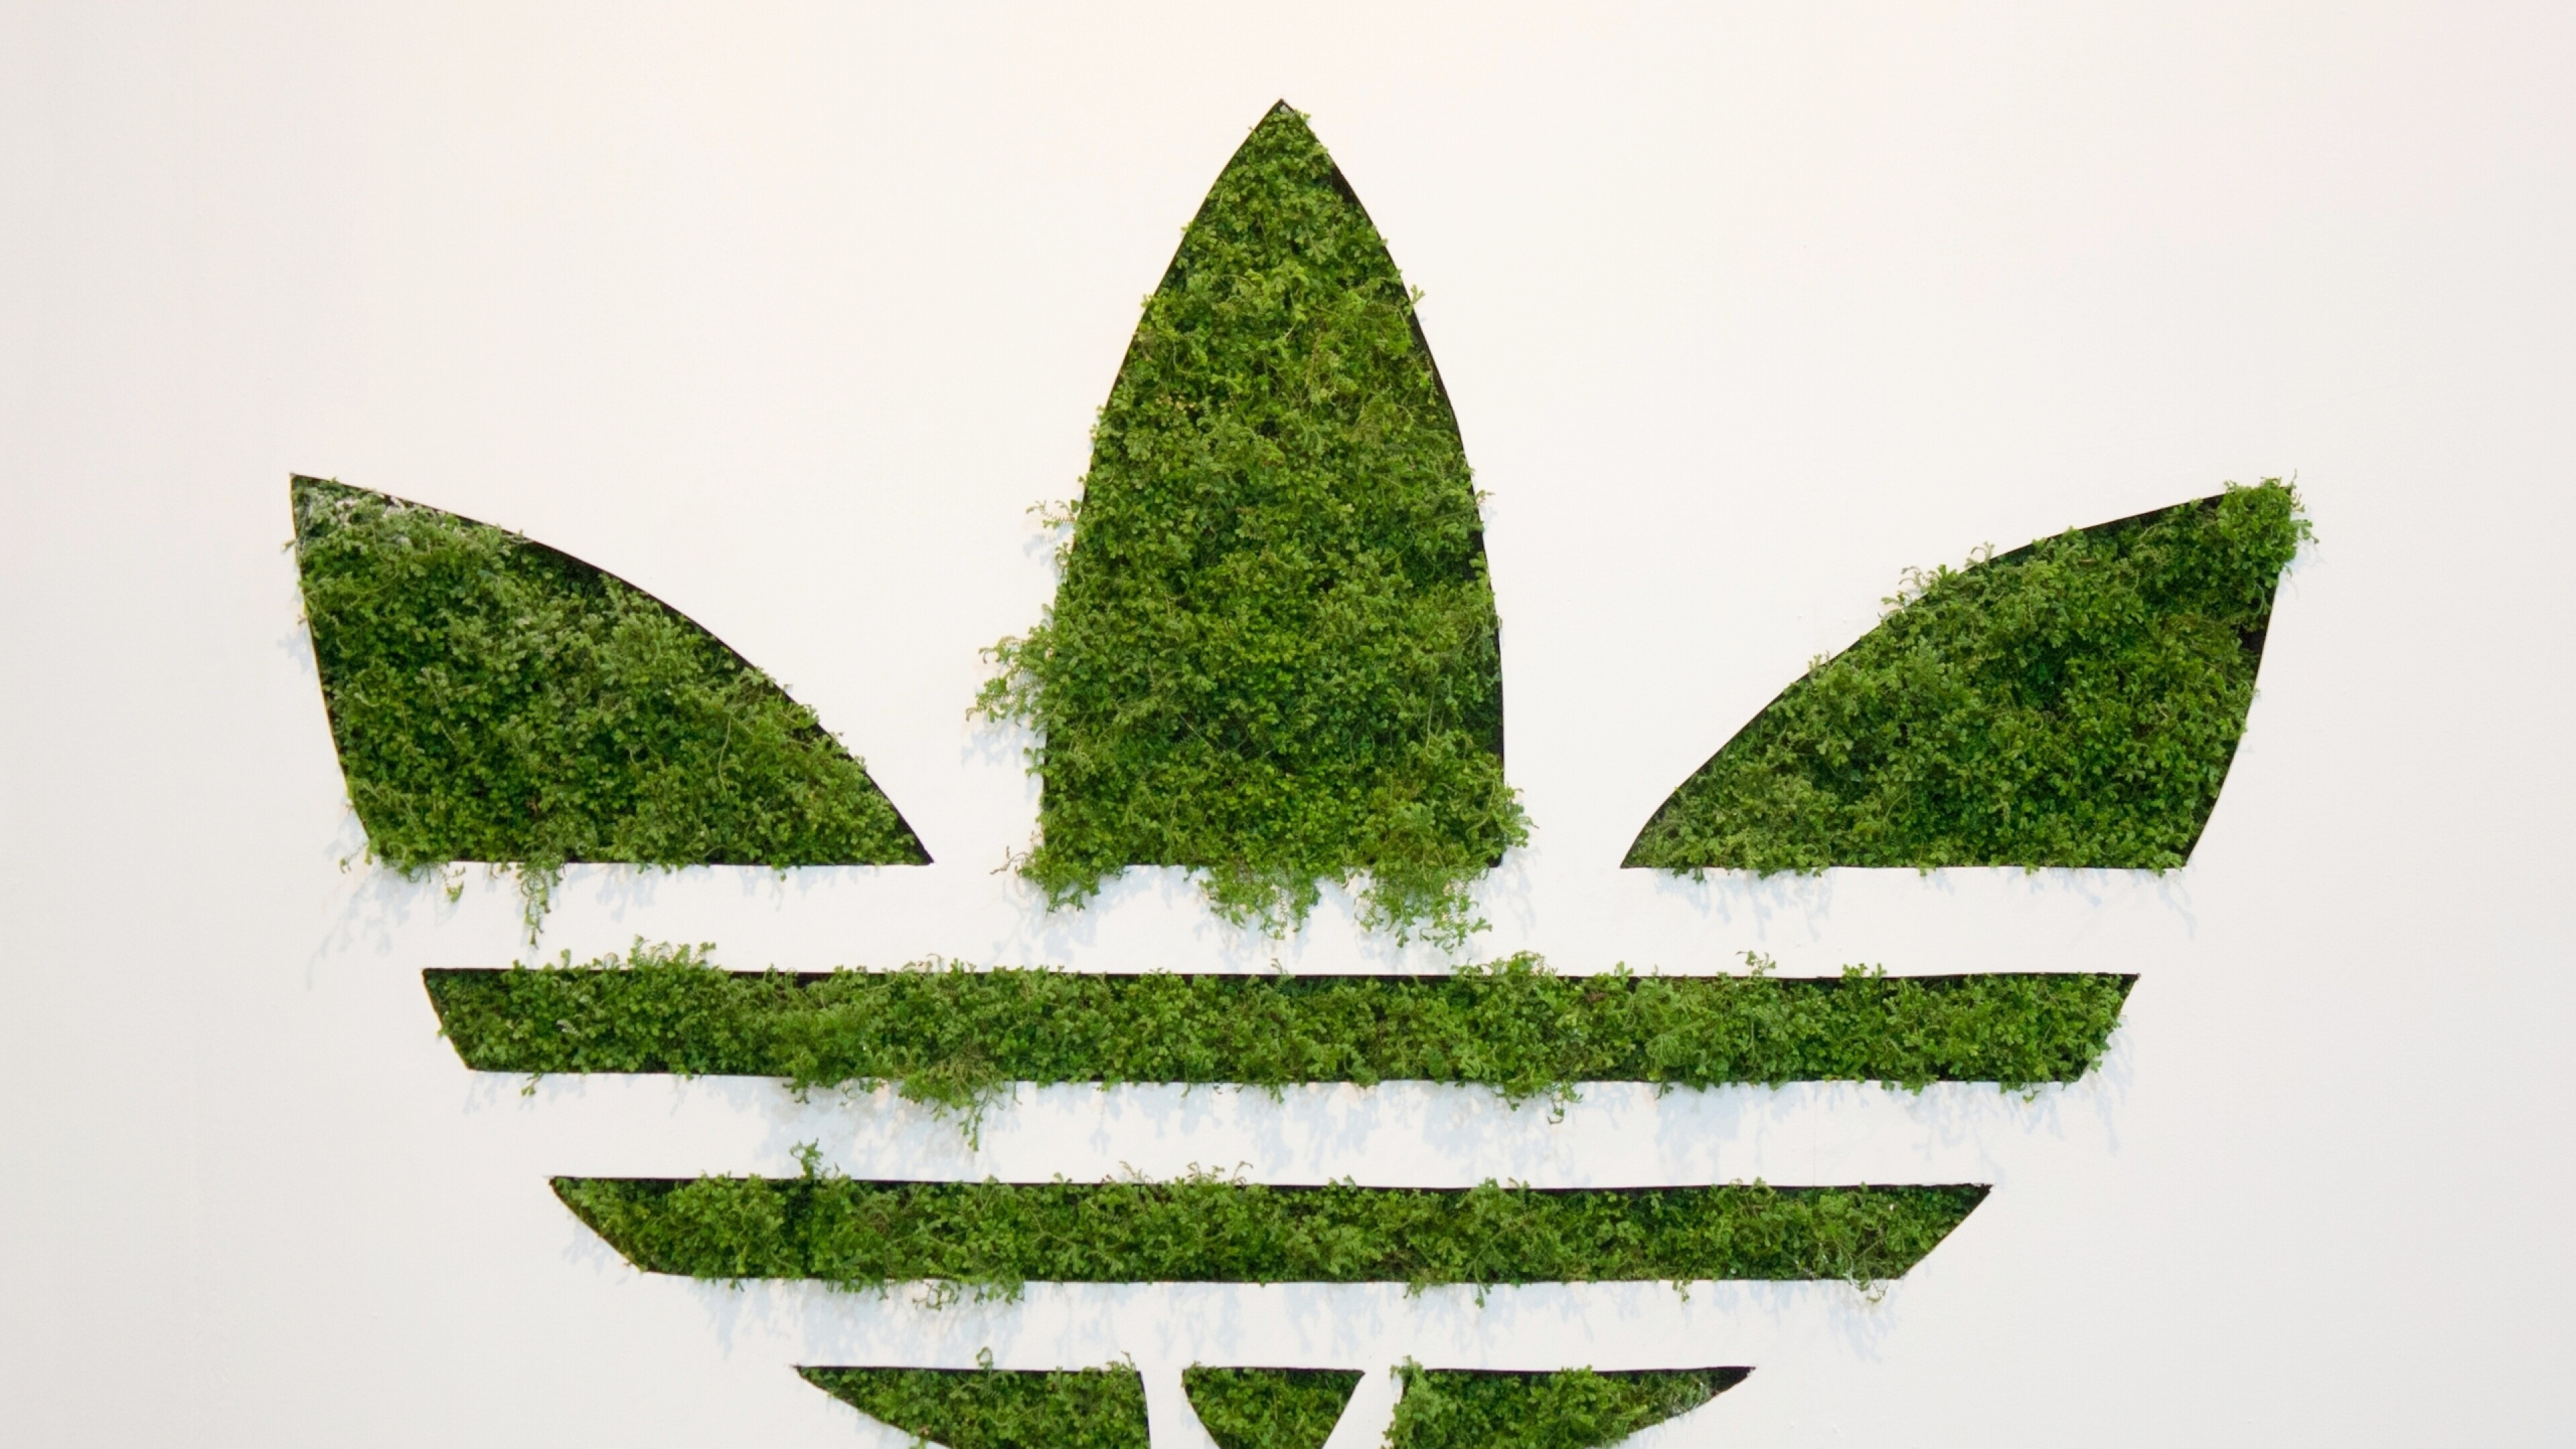 Adidas, Grass logo, HD wallpapers, Unique and stylish, 3840x2160 4K Desktop